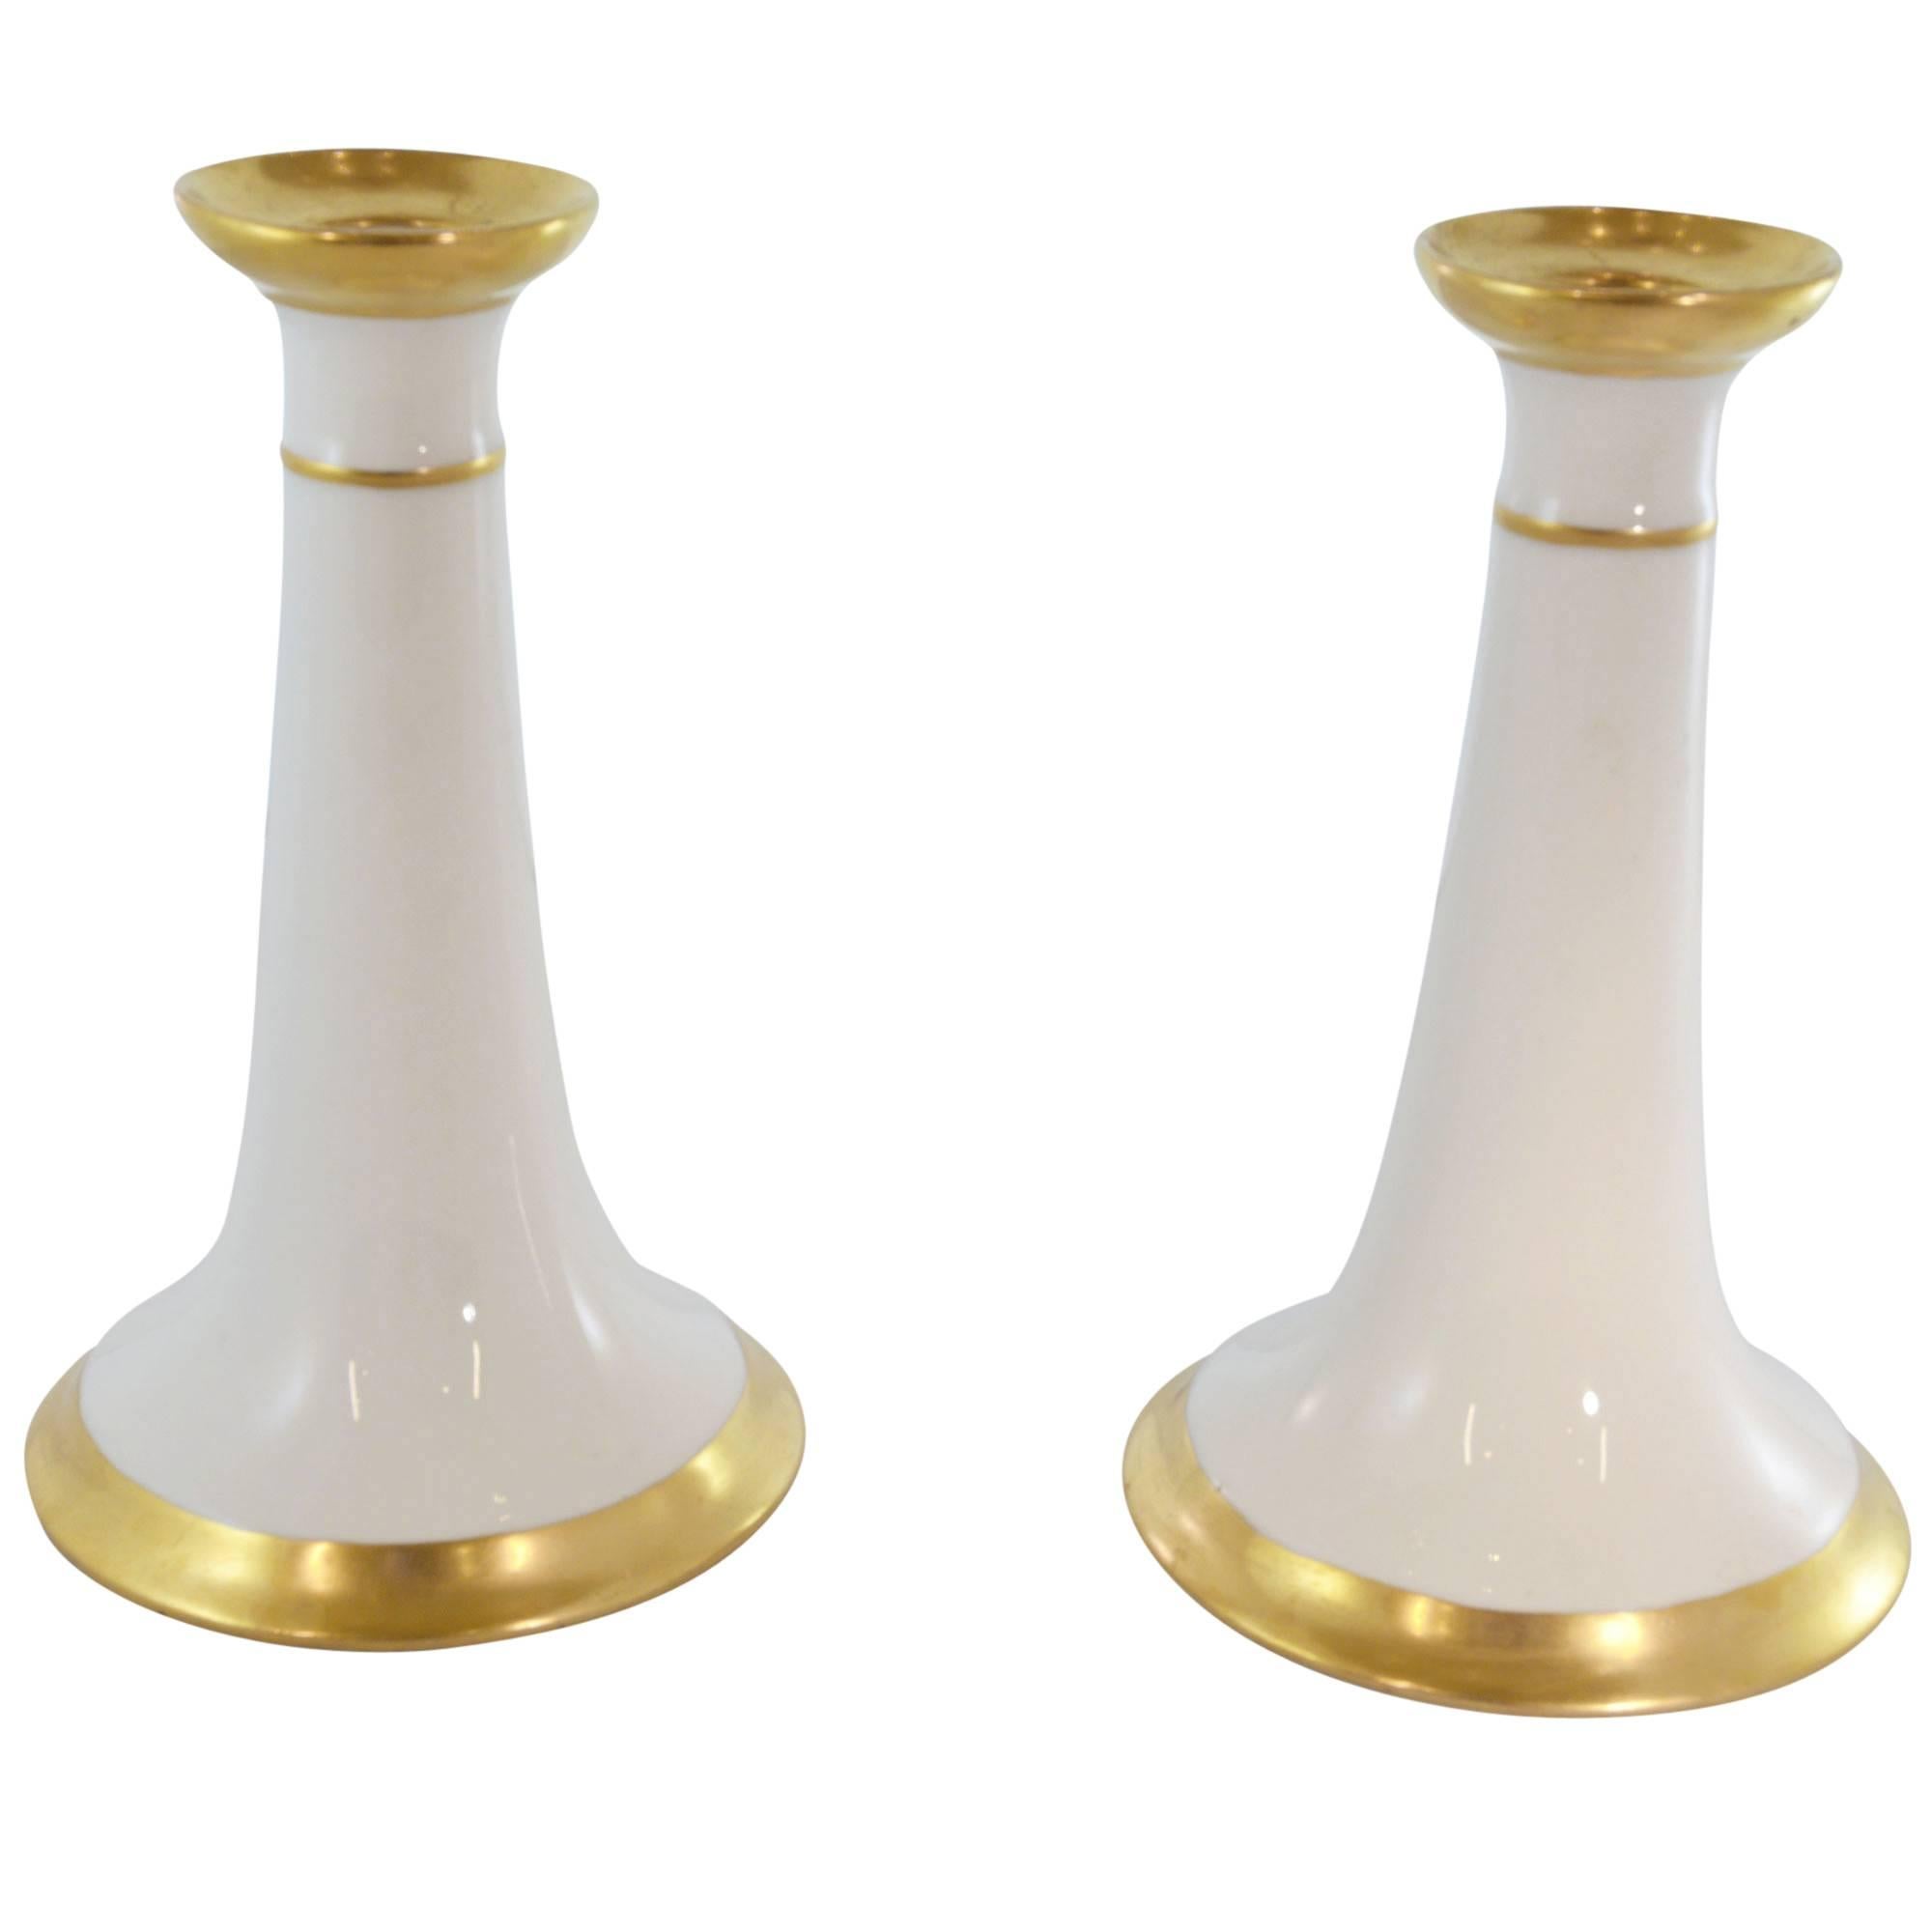 Near perfect condition Limoges candlesticks stand 7